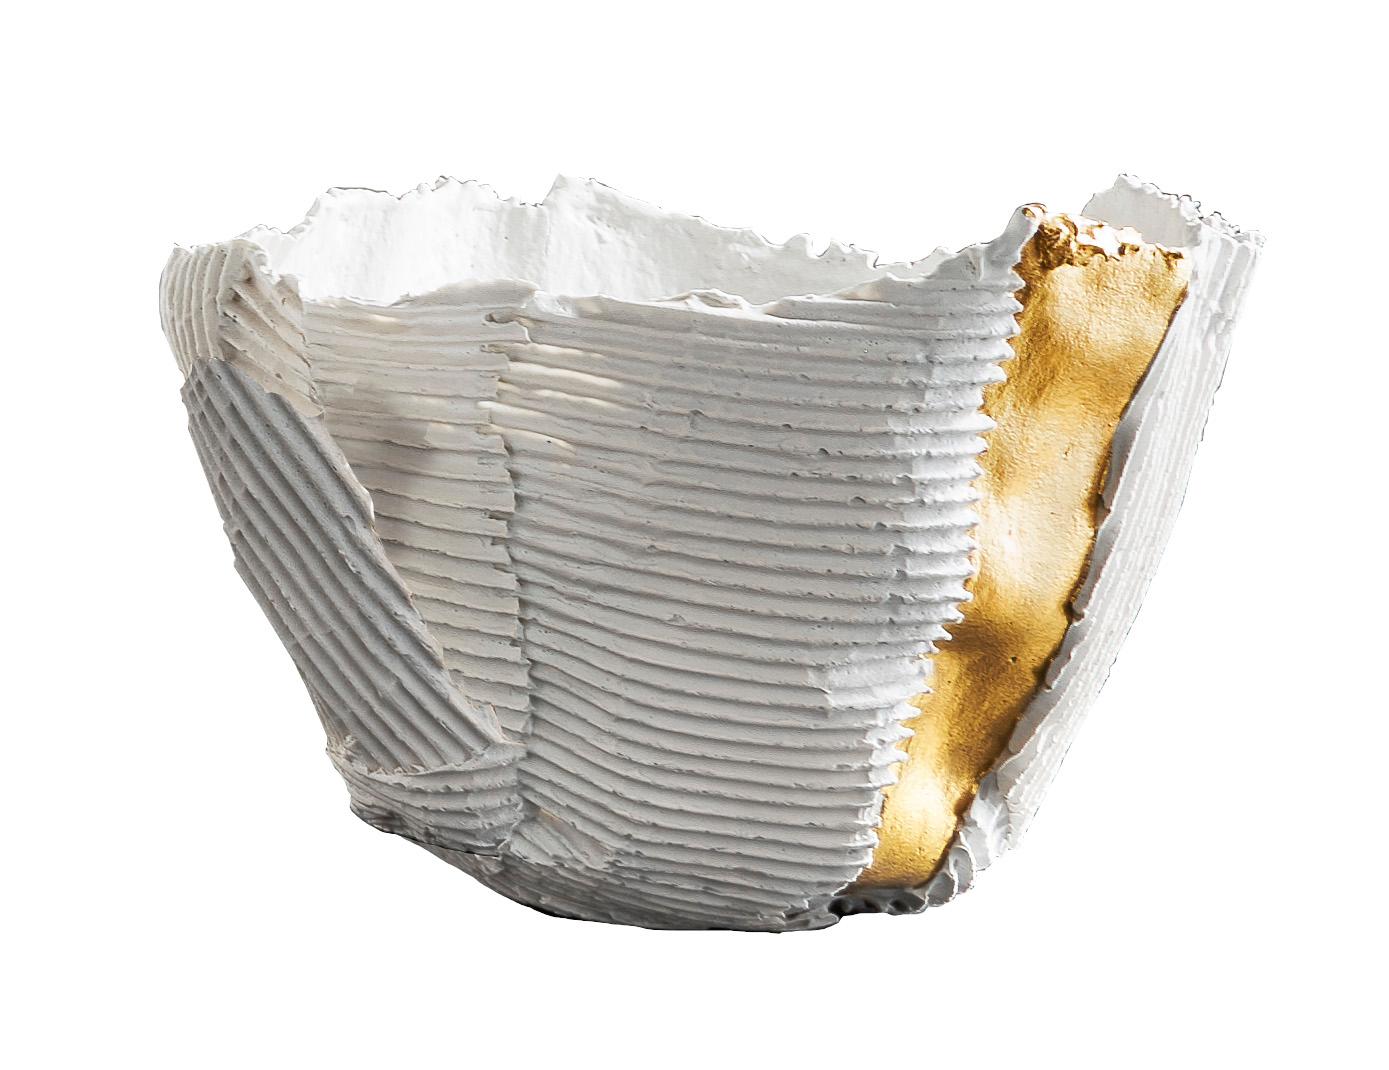 Striking and stately, this bowl features dynamic horizontal and vertical ridges and a distinctive panel insert in gold, whose vibrant color and smooth surface elegantly contrast with the expressive white for a striking visual impact. Taking on an